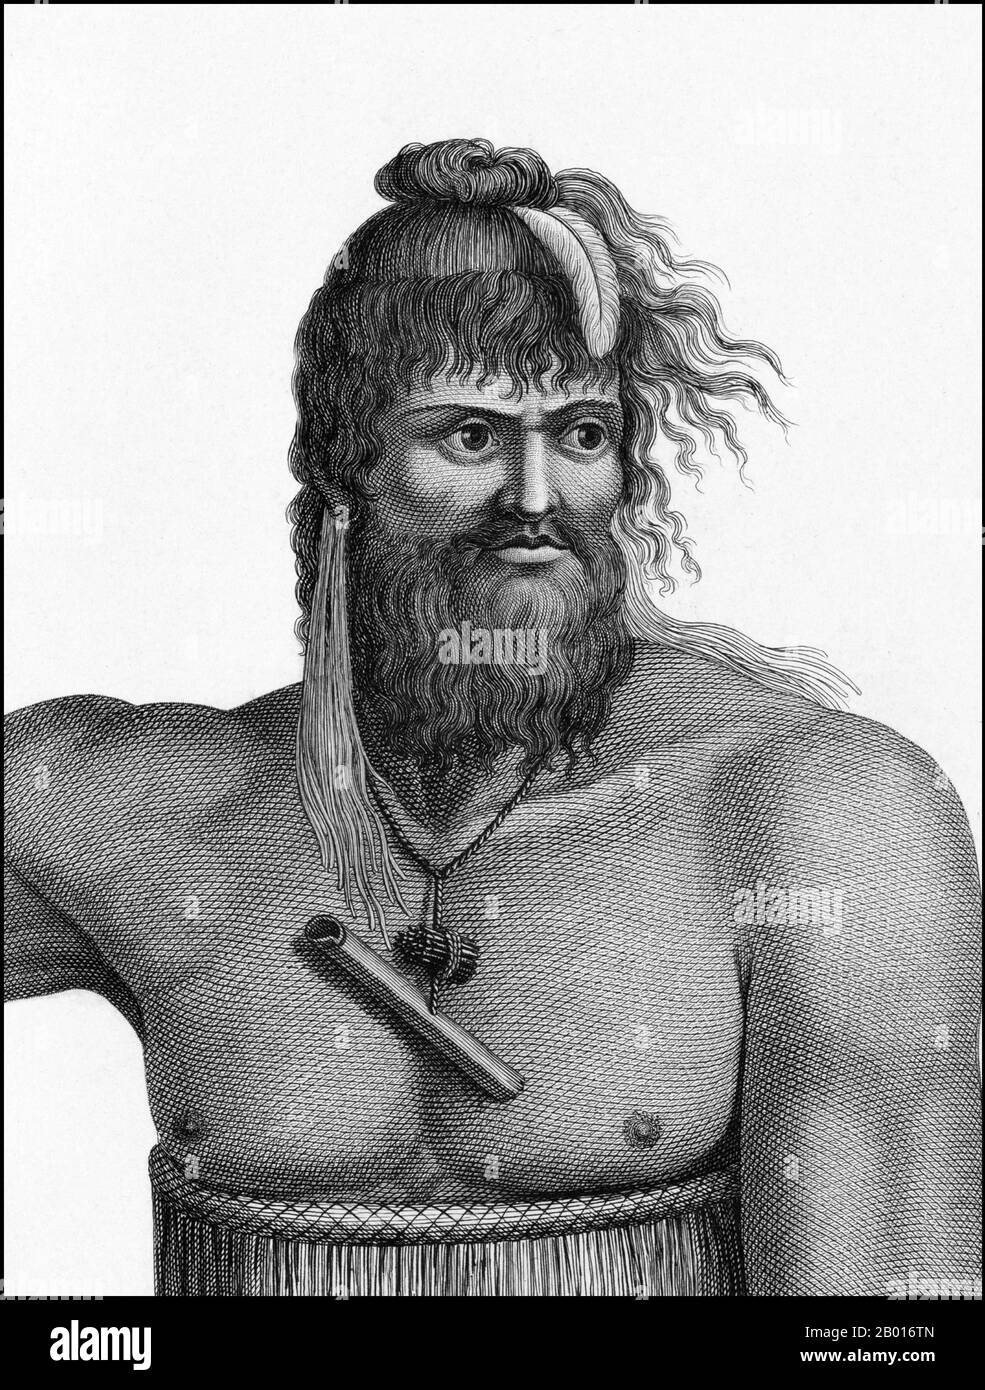 New Zealand: A Maori man. Engraving from 'Atlas du Voyage de La Pérouse' by Jean Piron (1767-1797) & Jacques-Louis Copia (1764-1799), 1792.  Jean-François de Galaup, Comte de La Pérouse (1741-1788) was a French explorer and naval officer. In 1785, the King of France commissioned La Perouse to head an expedition to explore the Pacific Ocean, to investigate whaling and fur prospects, and to establish French claims in this area. La Pérouse had admired the explorer James Cook, and wanted to continue his work. La Perouse was assigned two 500-ton ships called the Astrolabe and the Boussole. Stock Photo